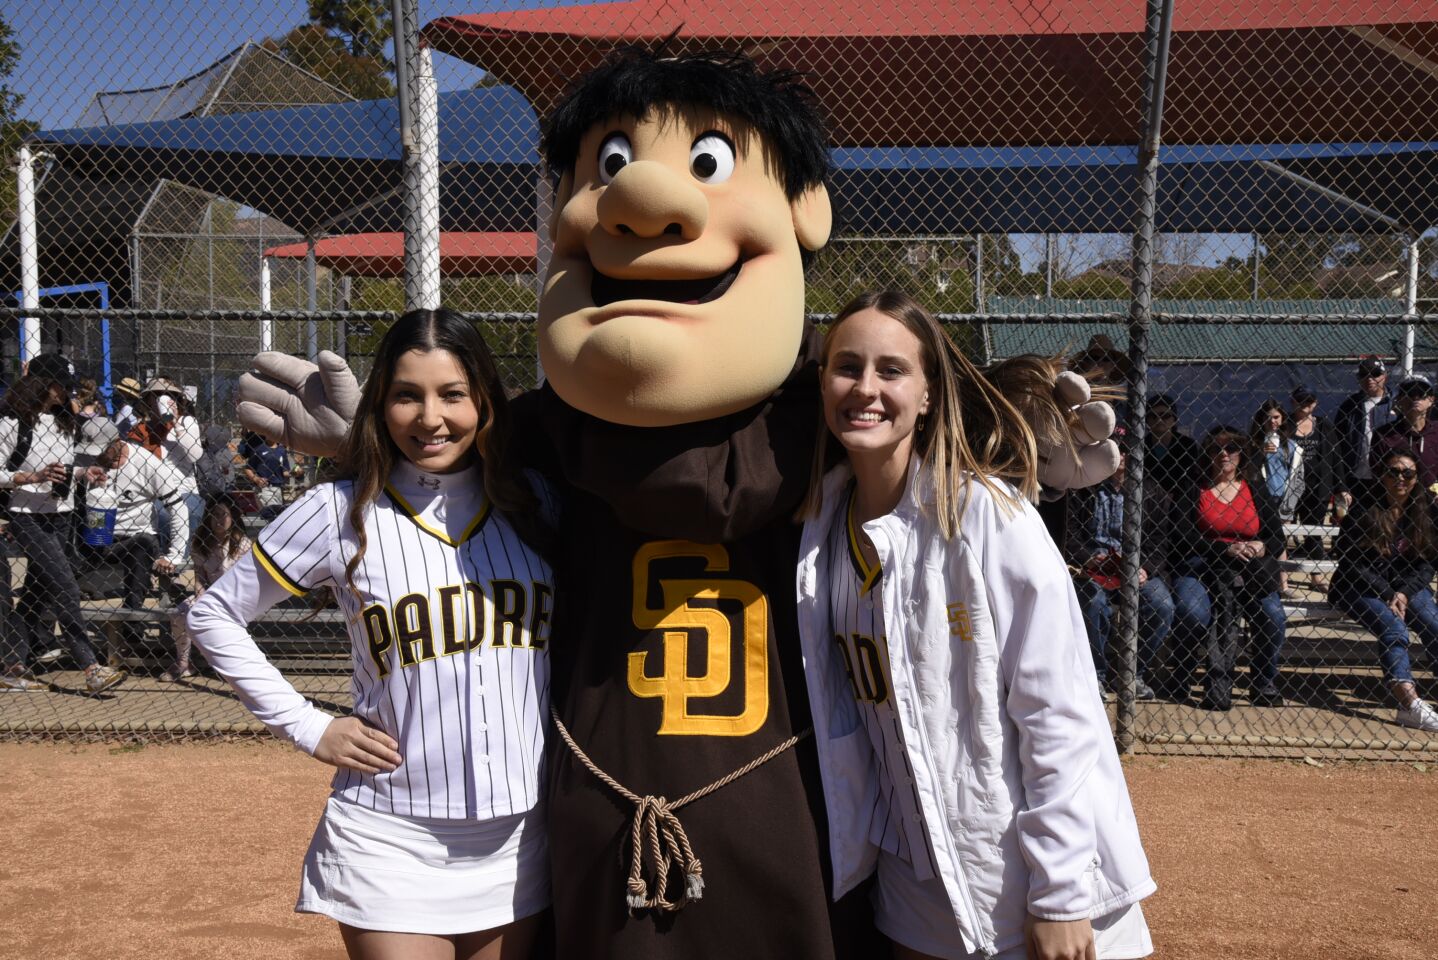 The Padres Friar was on hand to kick off the season